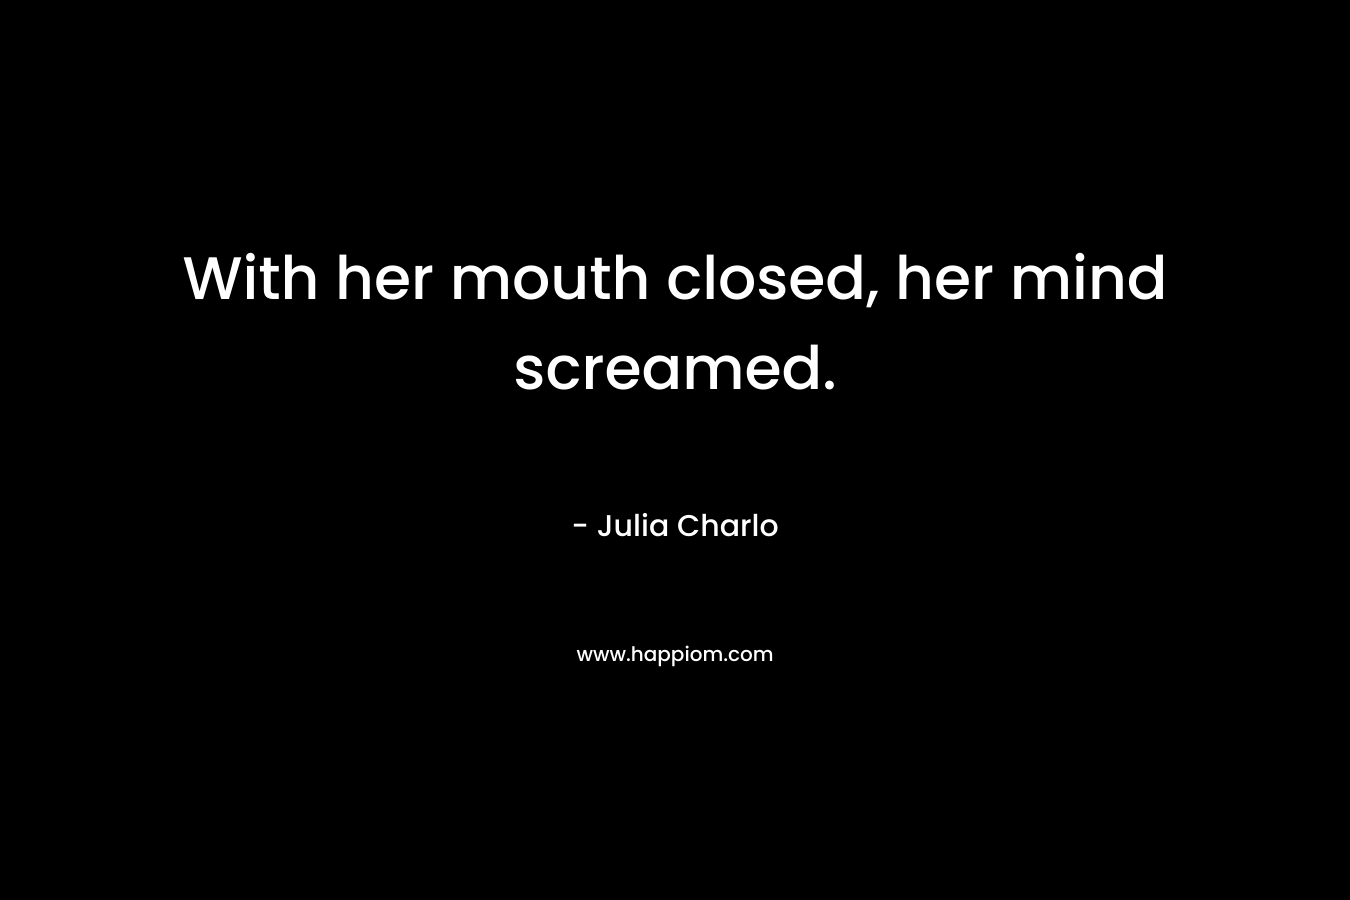 With her mouth closed, her mind screamed. – Julia Charlo